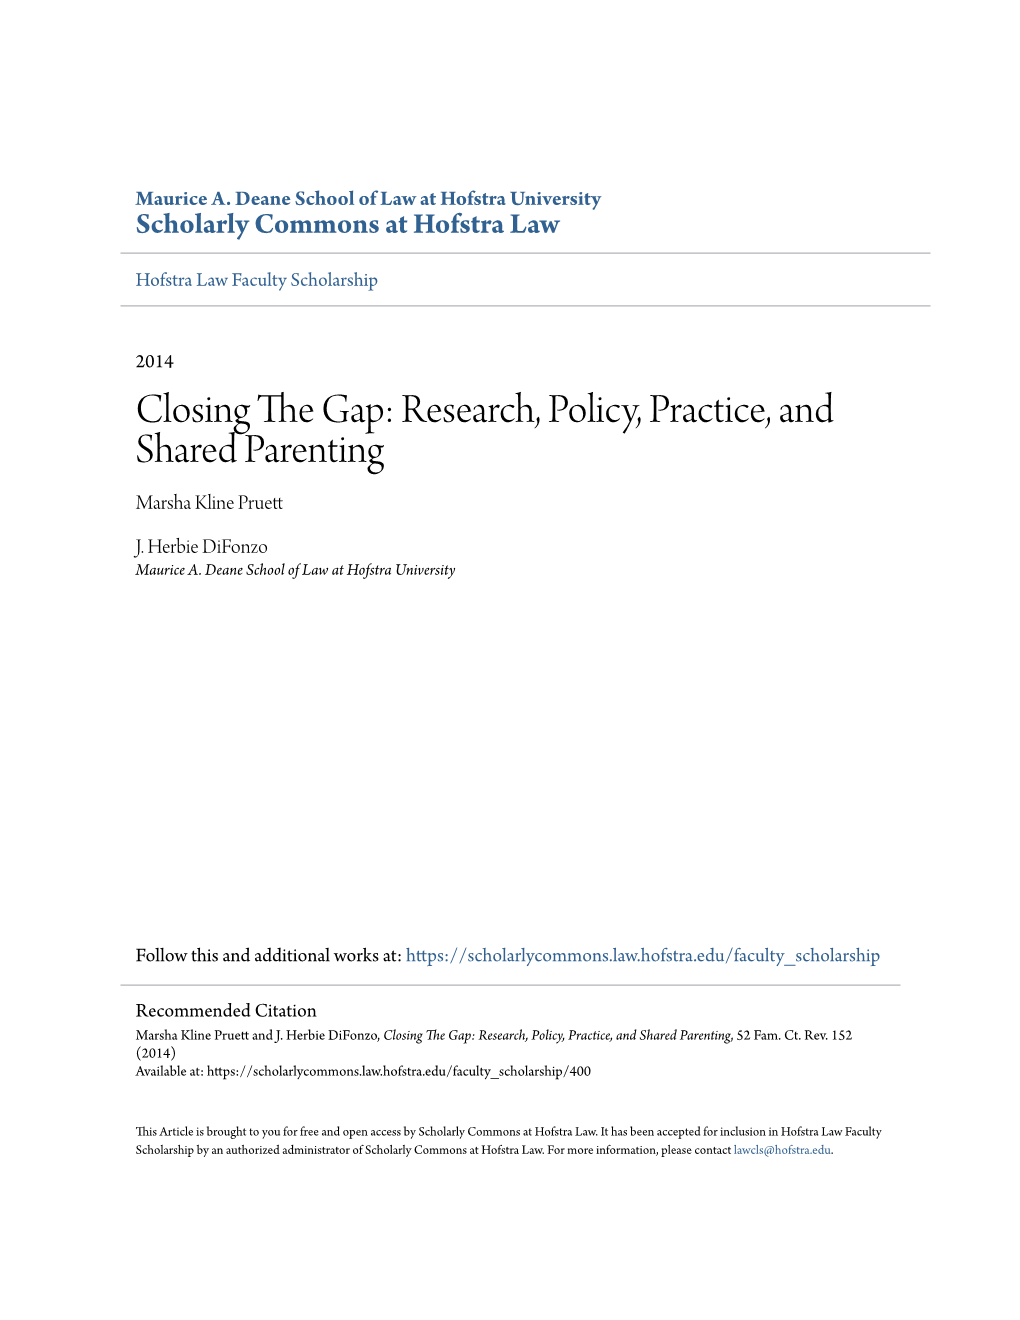 Closing the Gap: Research, Policy, Practice, and Shared Parenting, 52 Fam